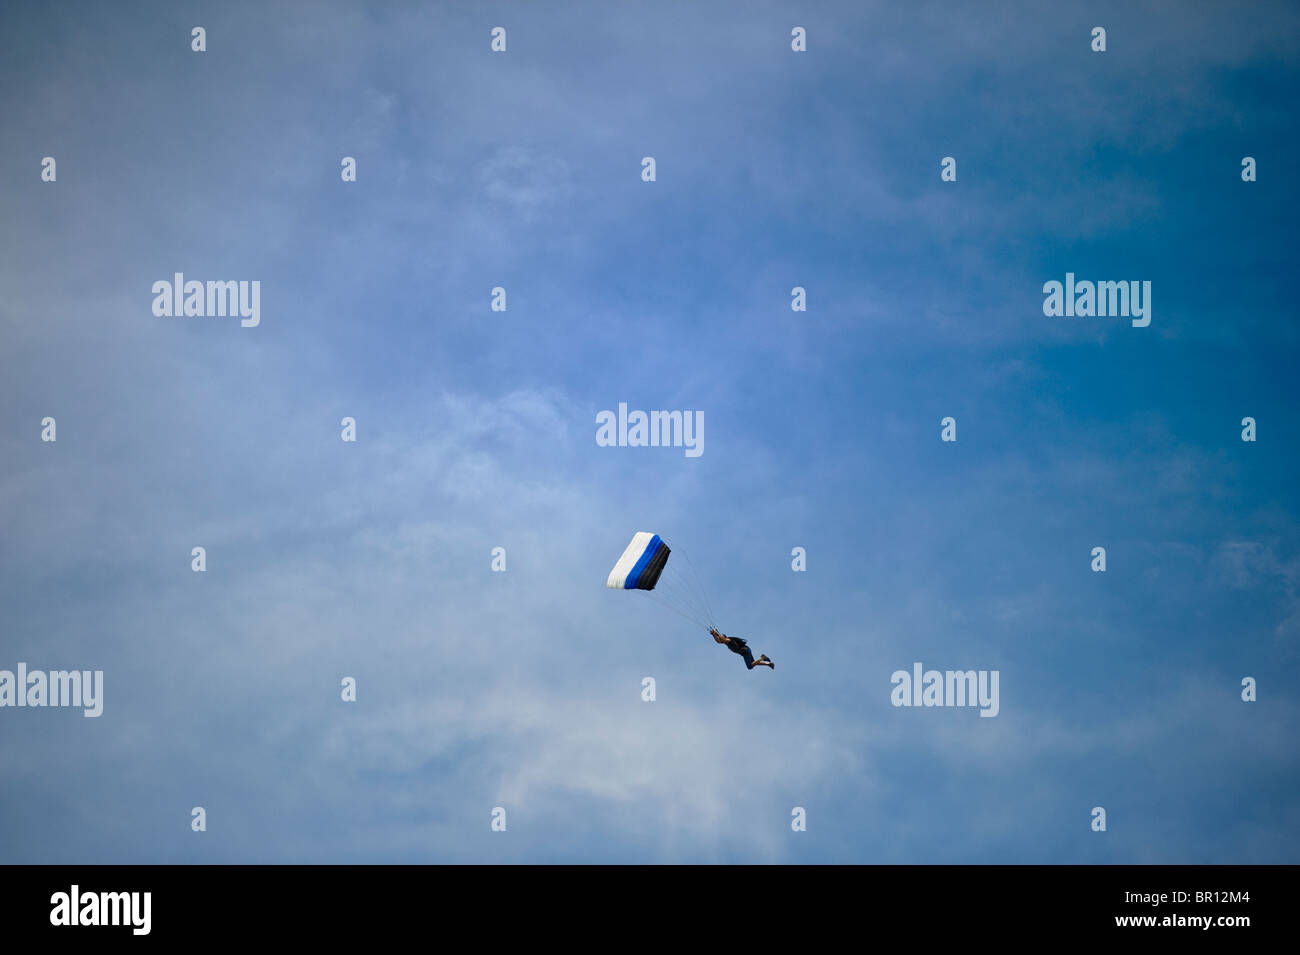 Skydiver parachutist intentionally spiral out of the sky to swoop their landing. Stock Photo